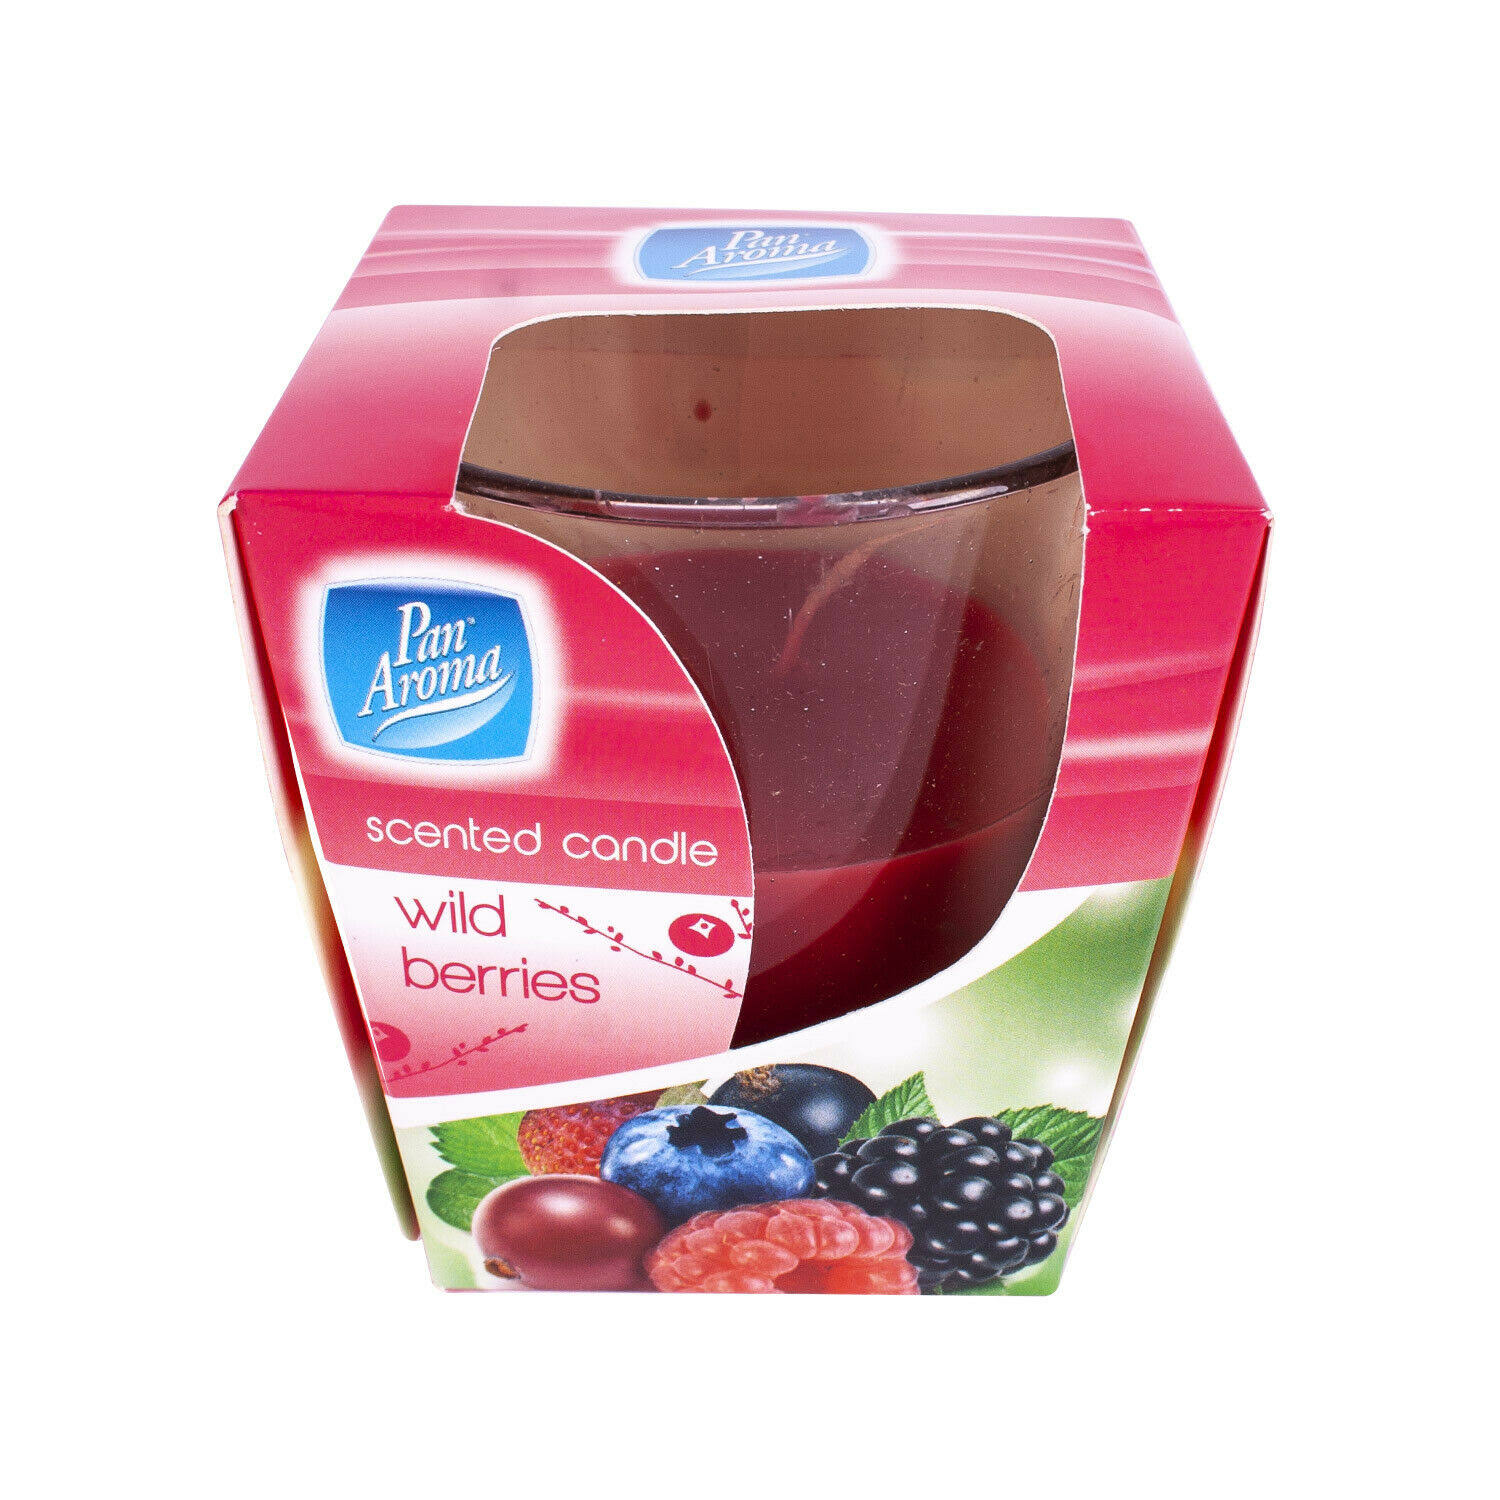 Pan Aroma Scented Candle - Wild Berries